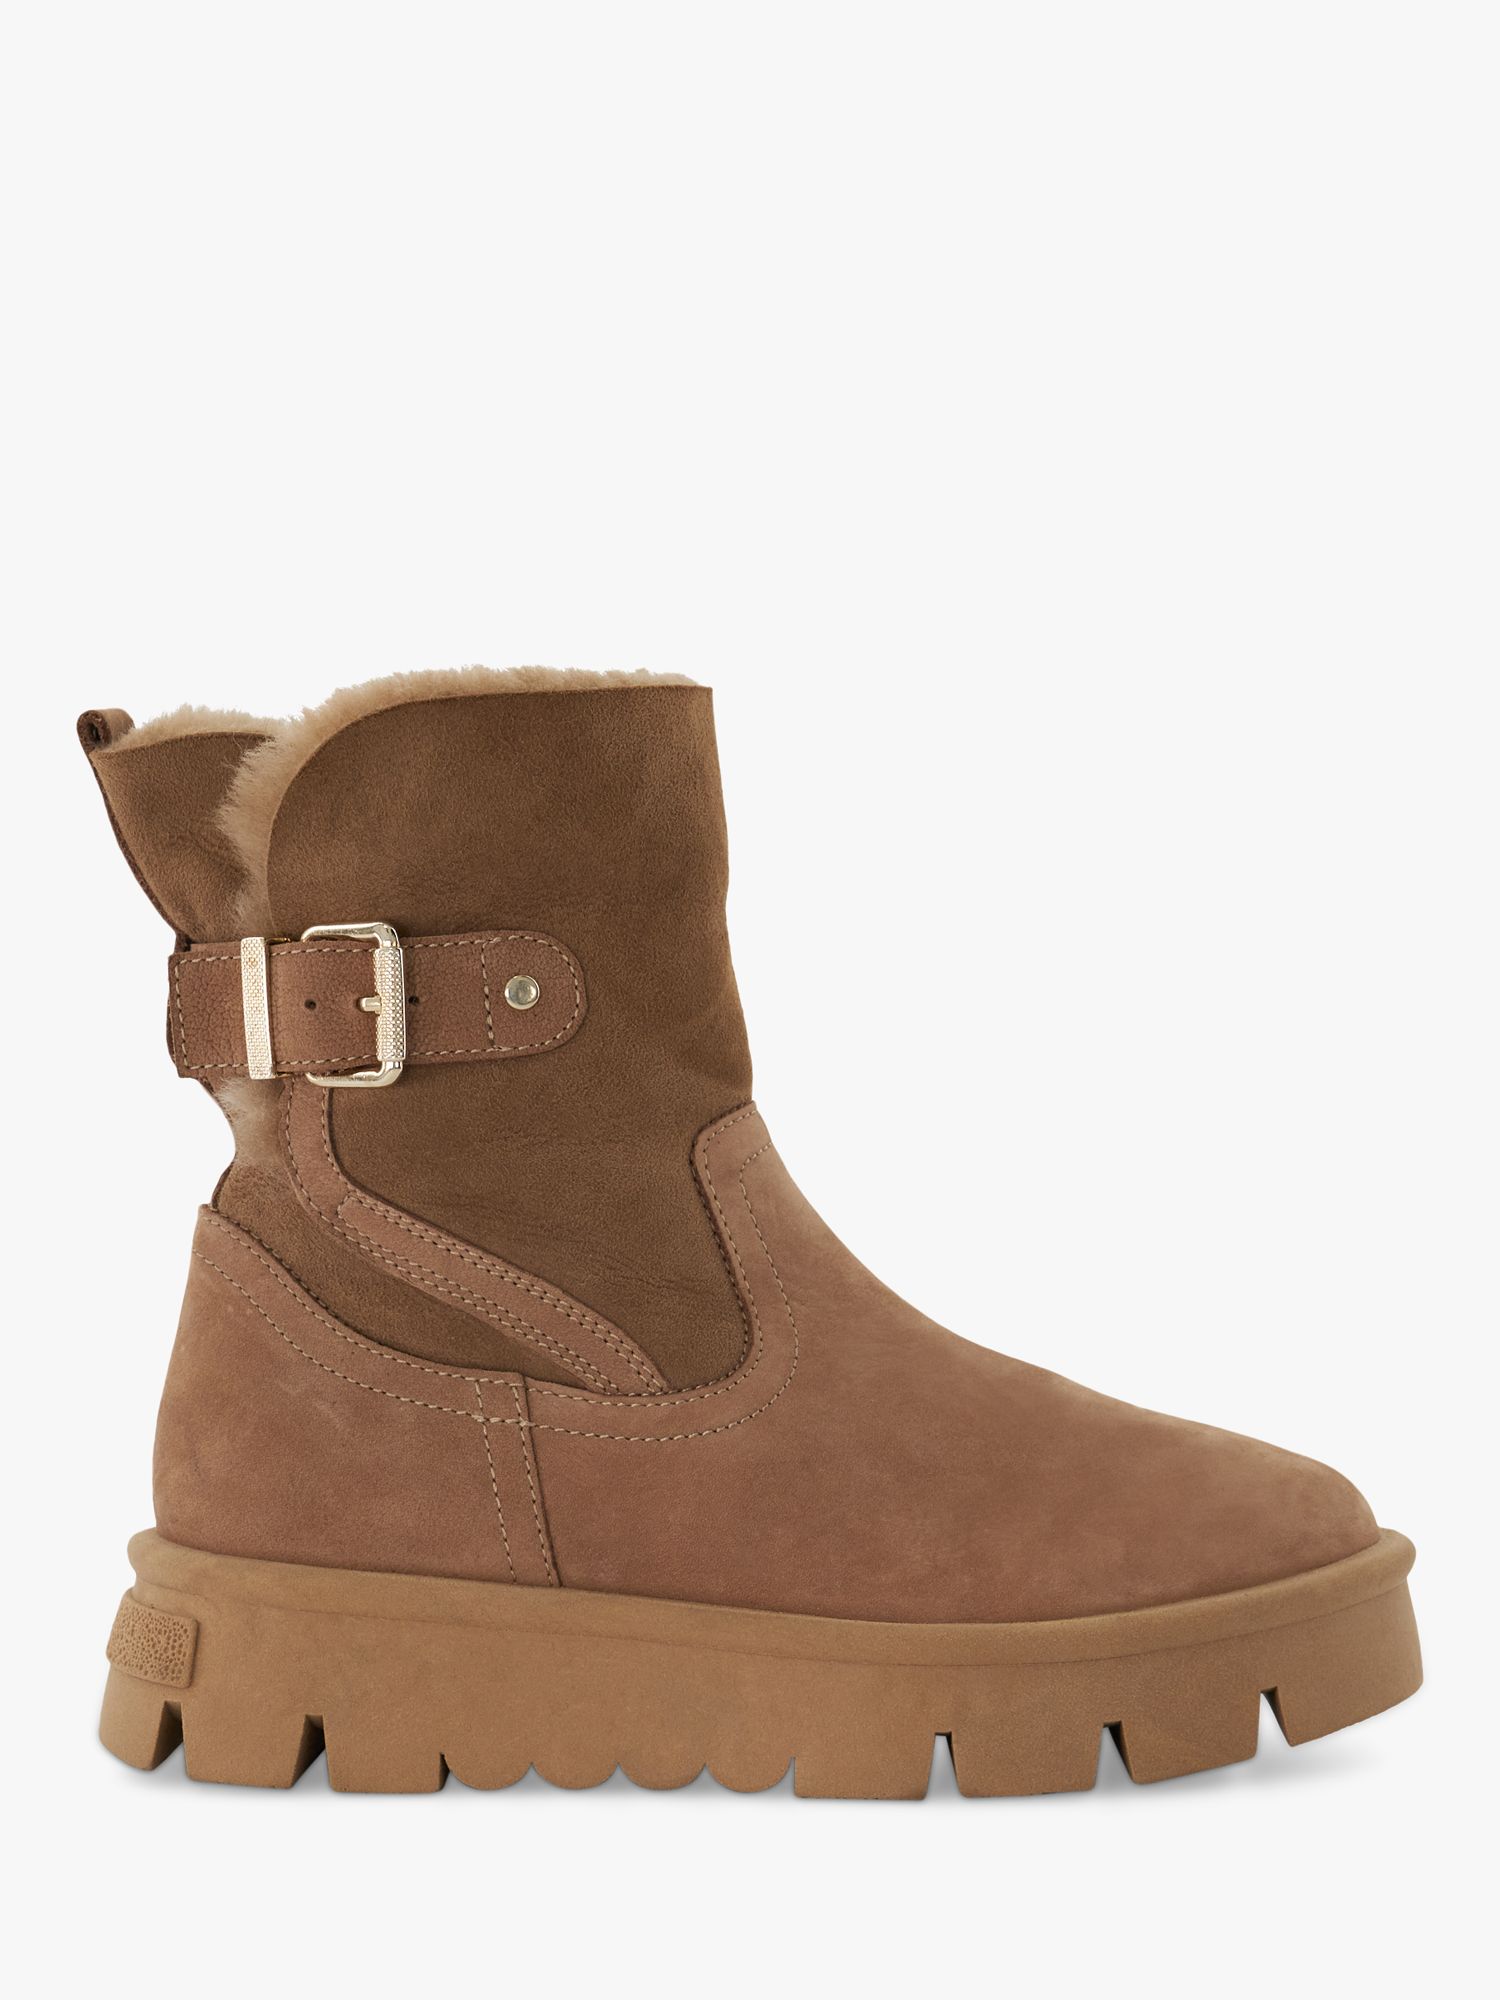 Buy Dune Pheebs Suede Ankle Boots Online at johnlewis.com